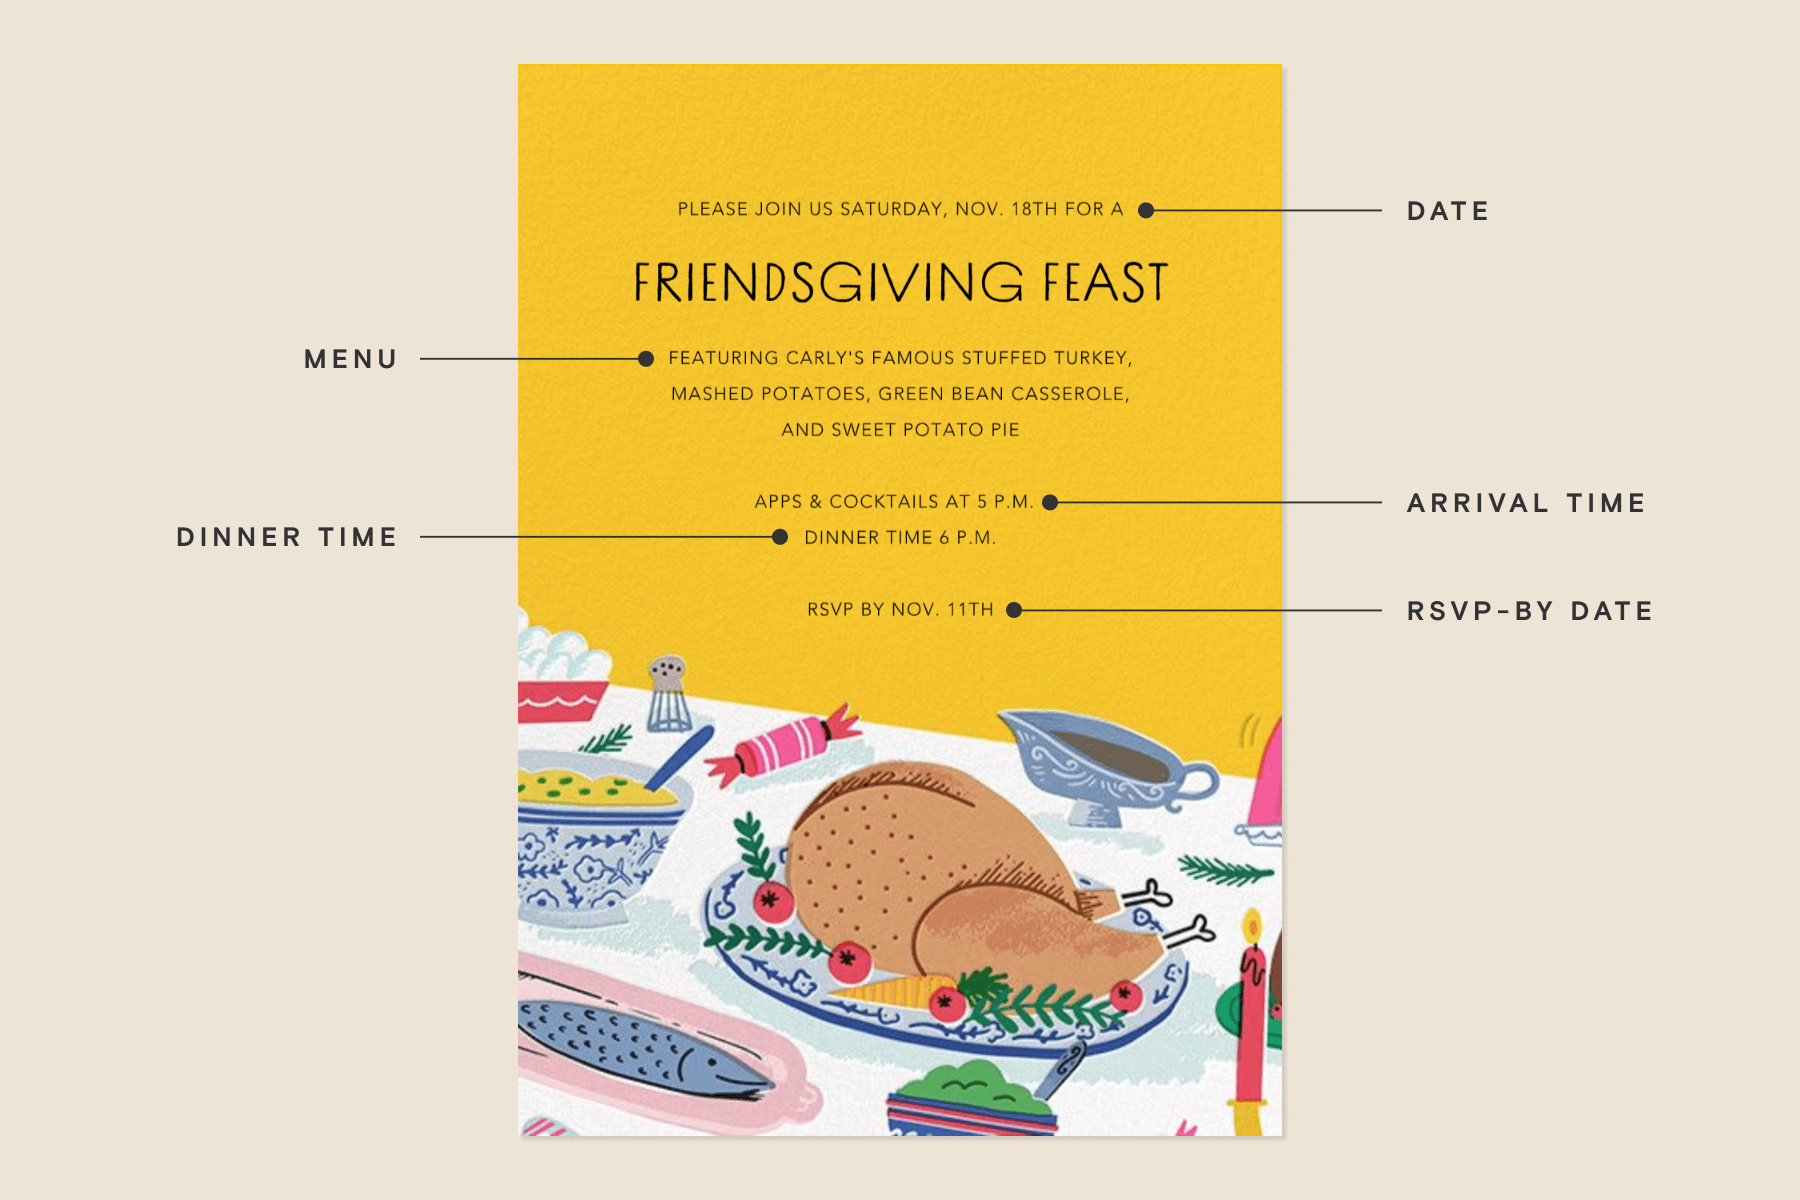 A diagram of a yellow Friendsgiving invitation with an image of a turkey dinner on the bottom. Lines point to the date, menu, arrival time, dinner time, and RSVP-by date.